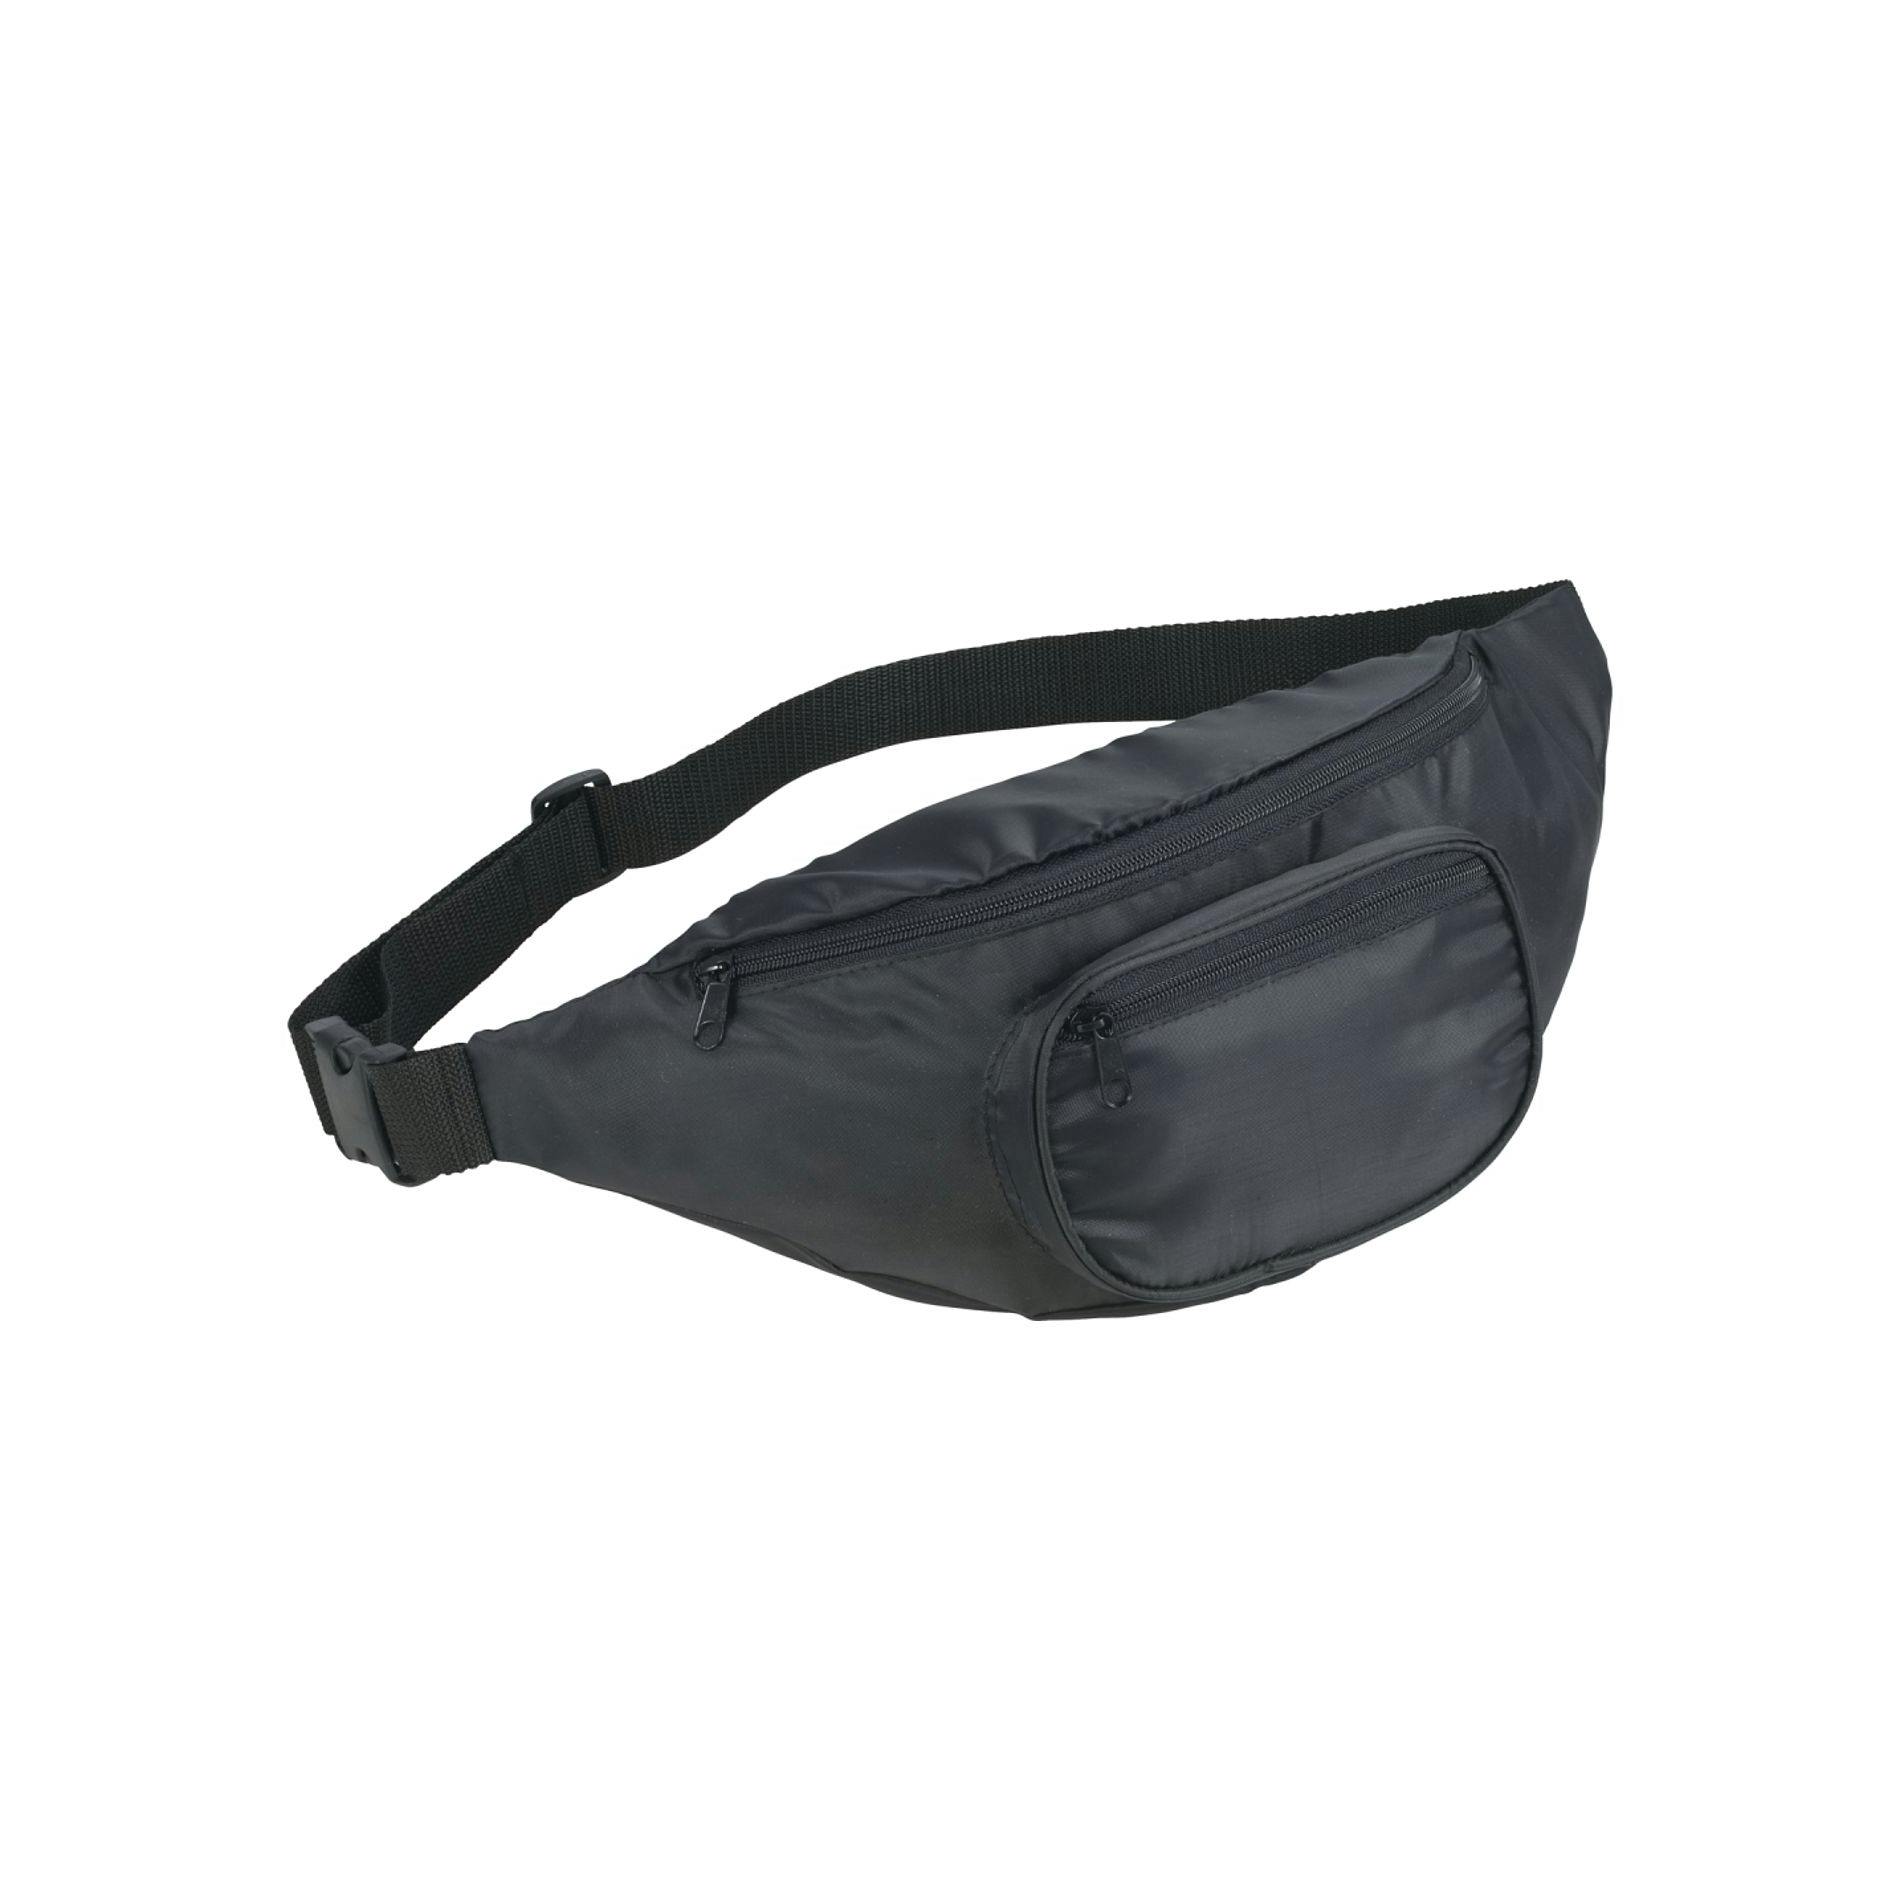 Hipster Deluxe Fanny Pack - additional Image 3